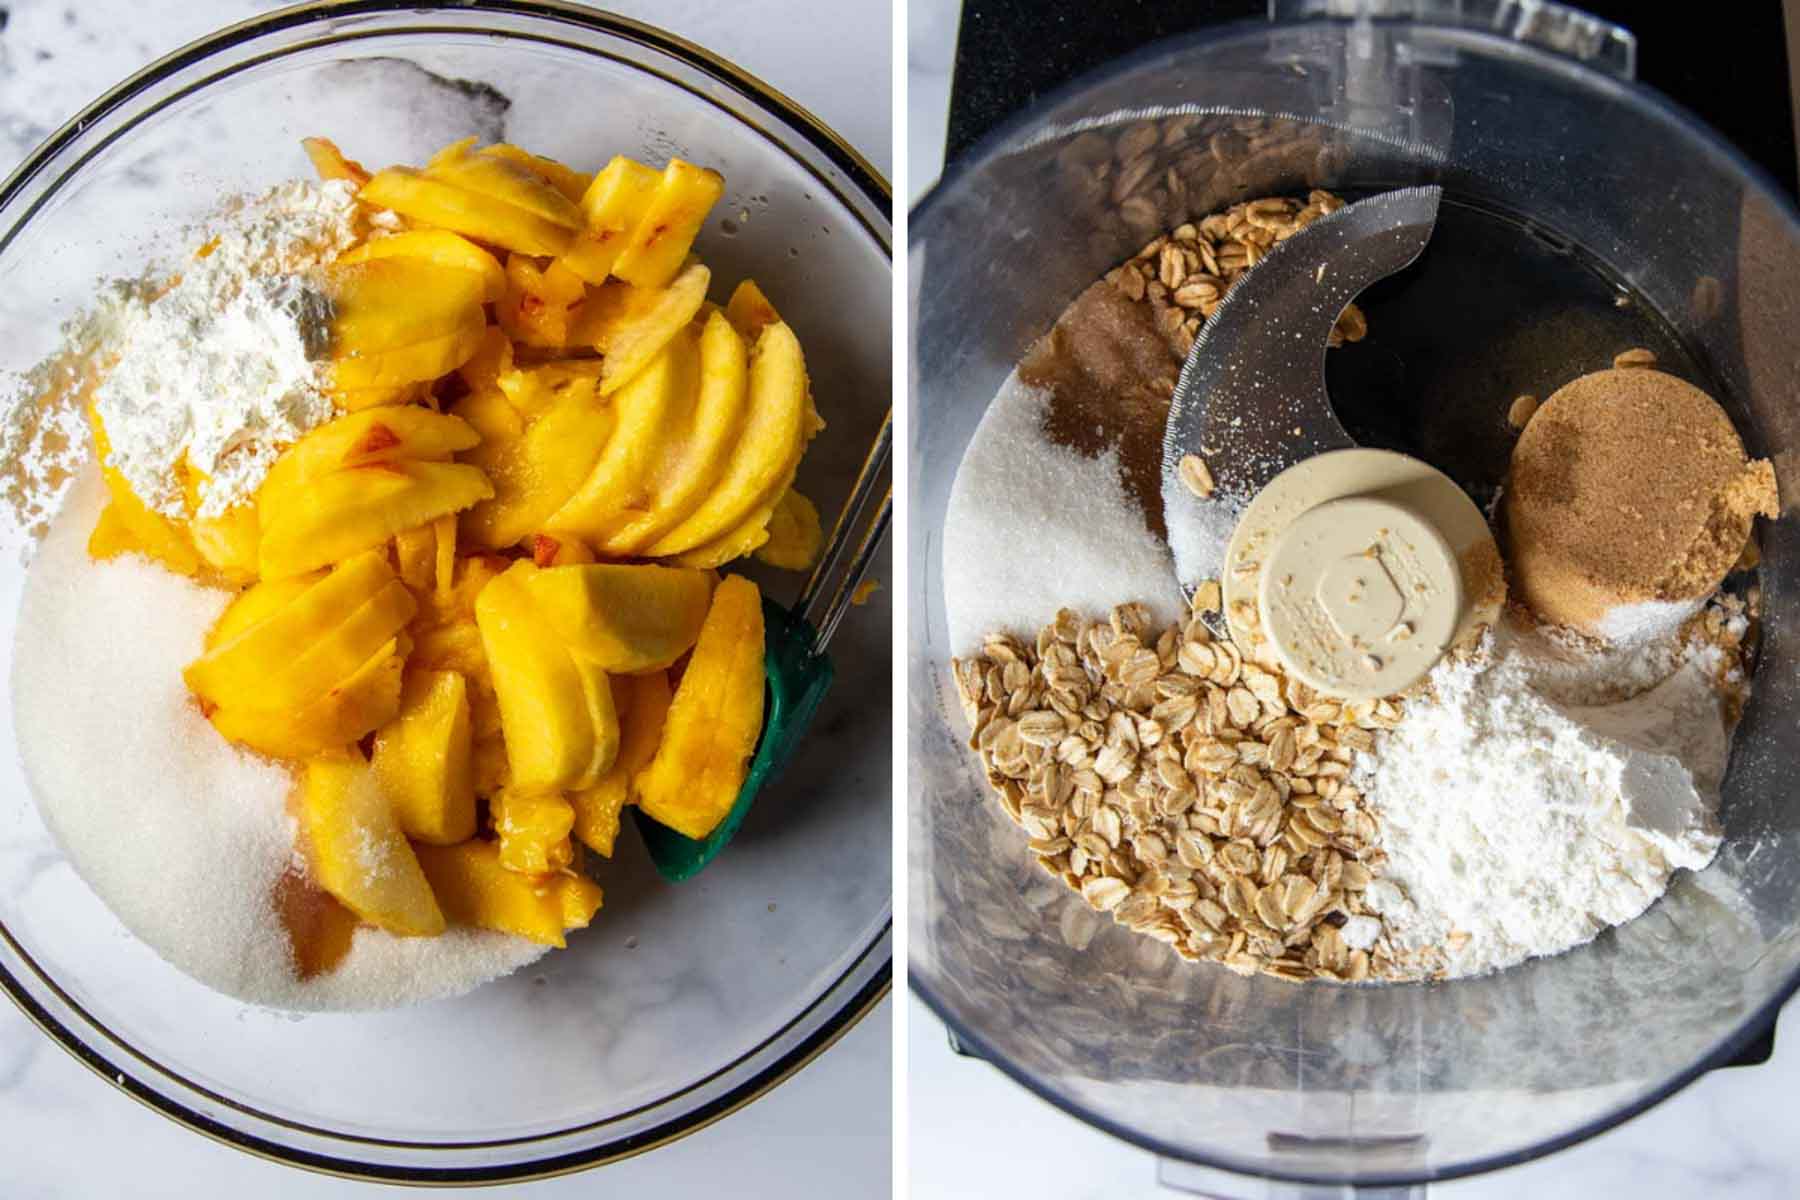 images showing ingredients for peach filling and crisp topping ingredients in a food processor